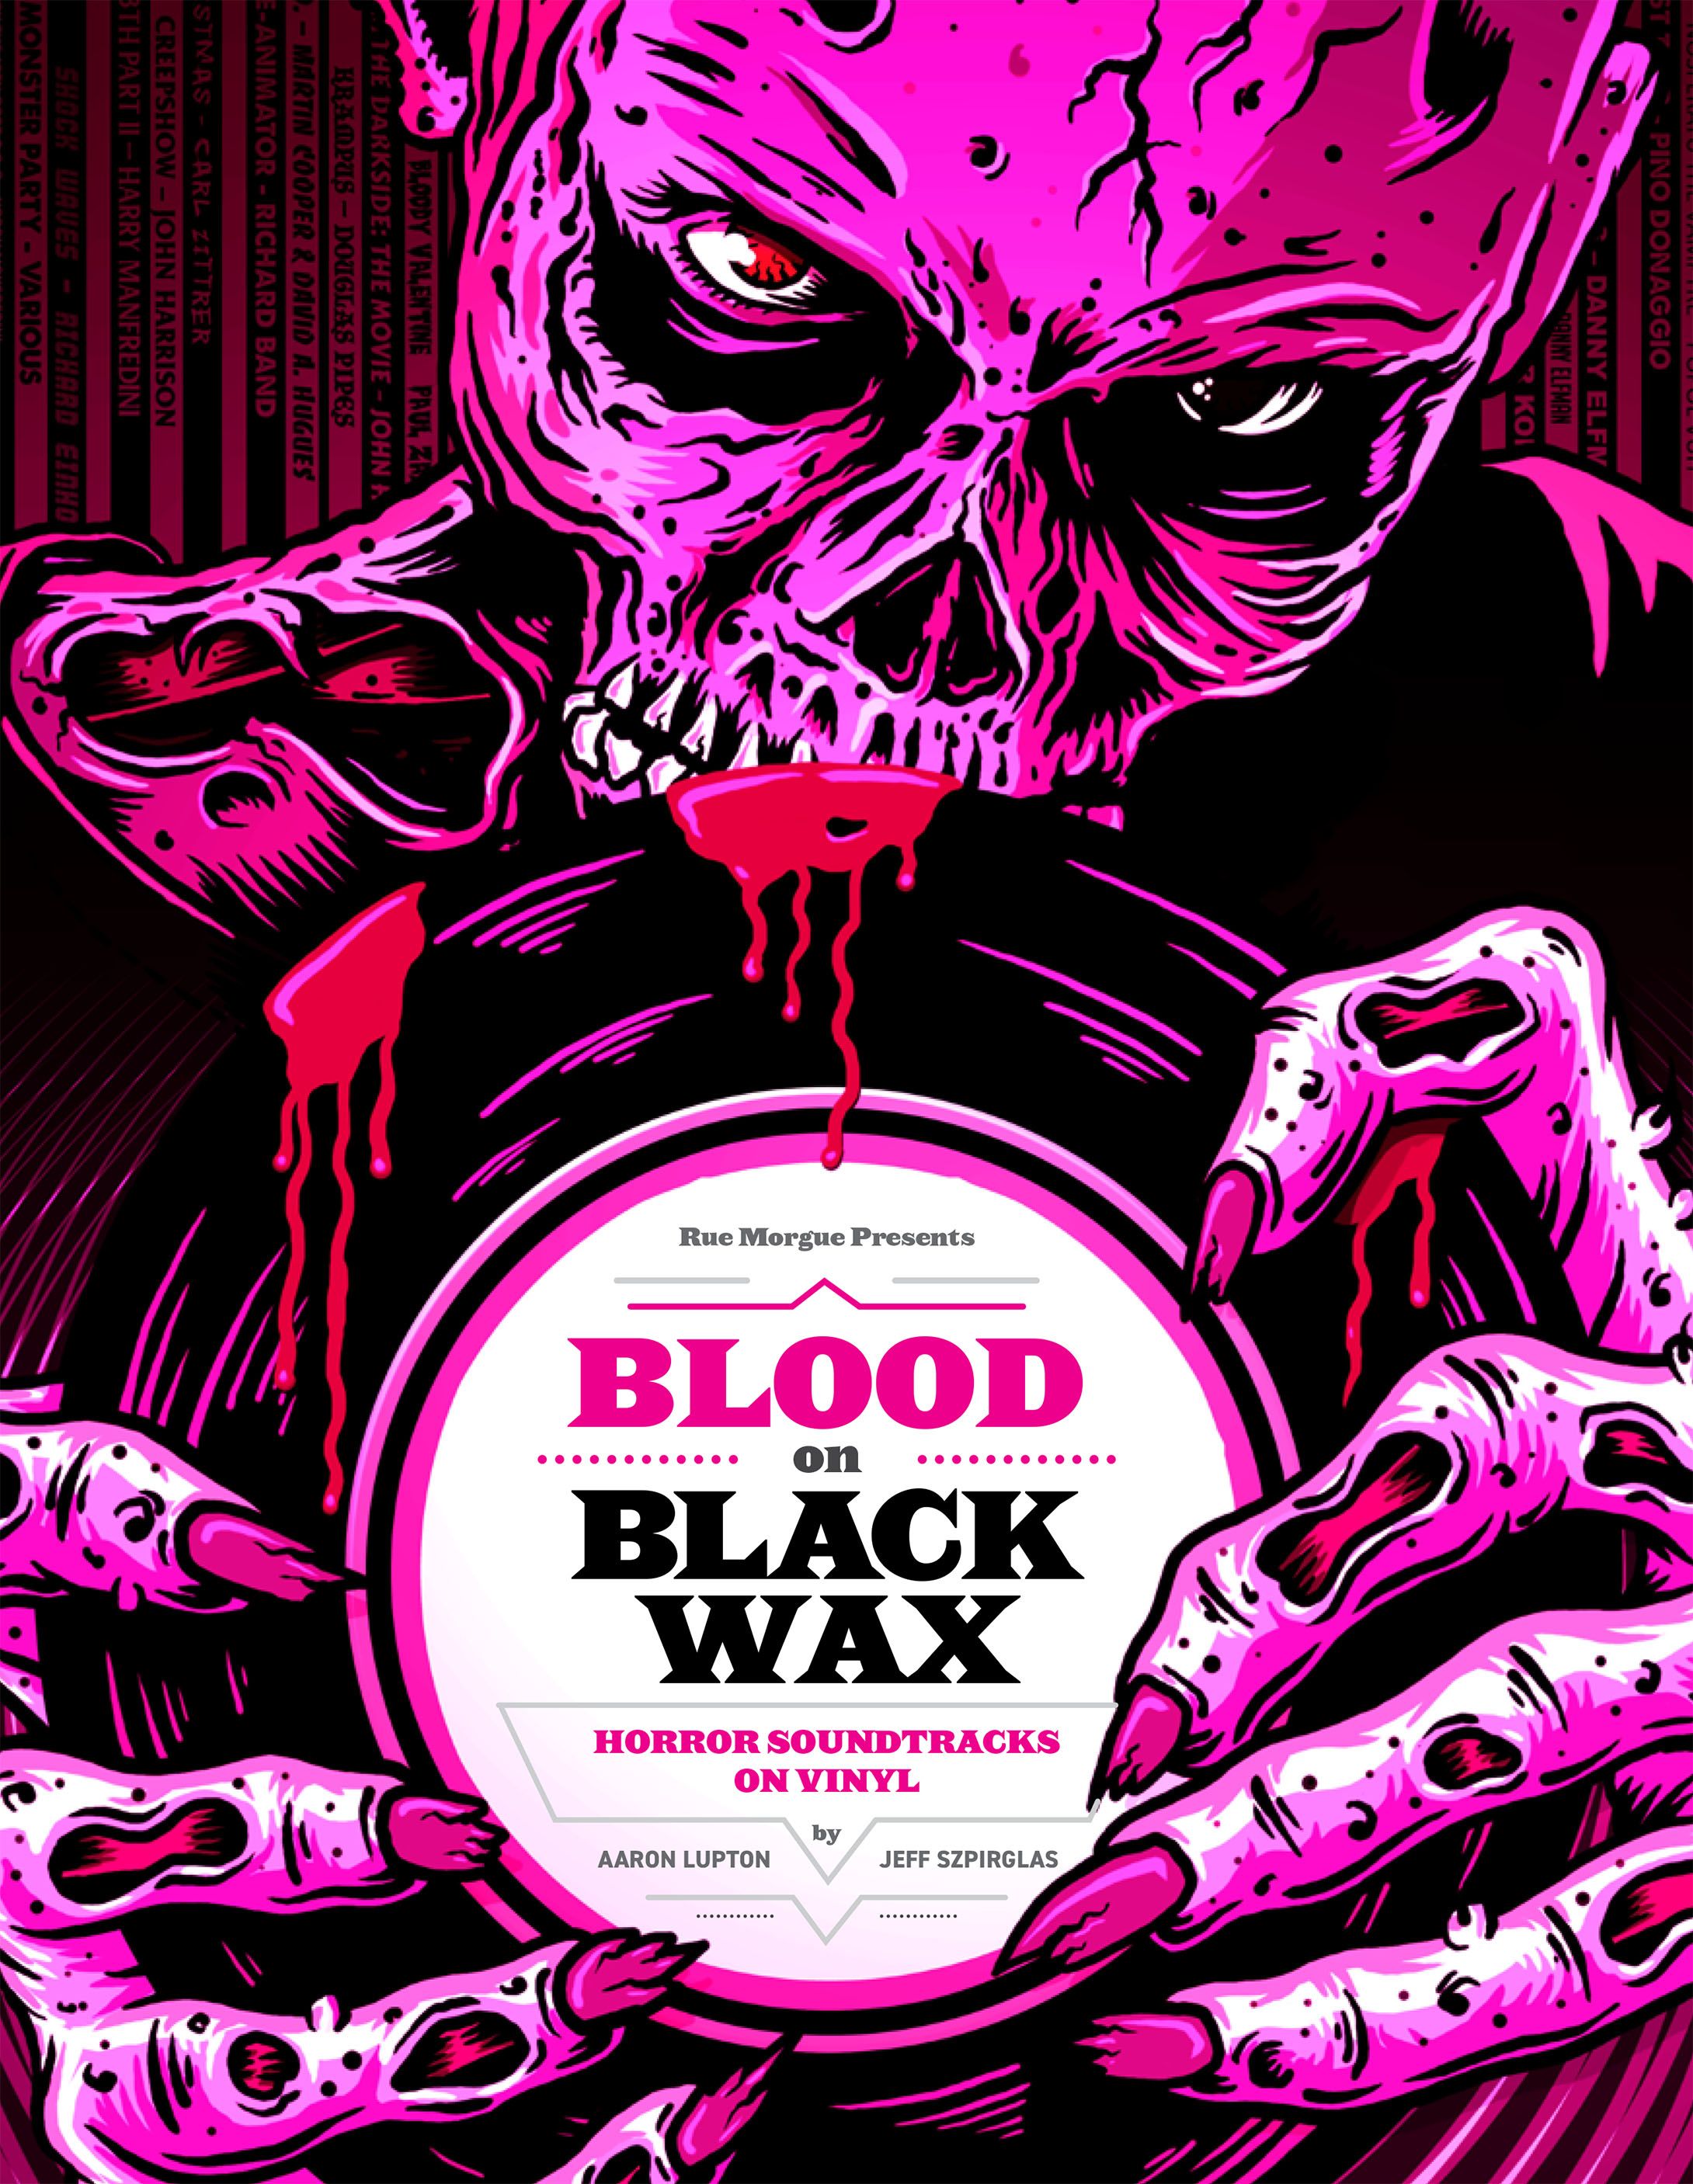 Blood on Black Wax: Horror Soundtracks on Vinyl - Expanded Edition